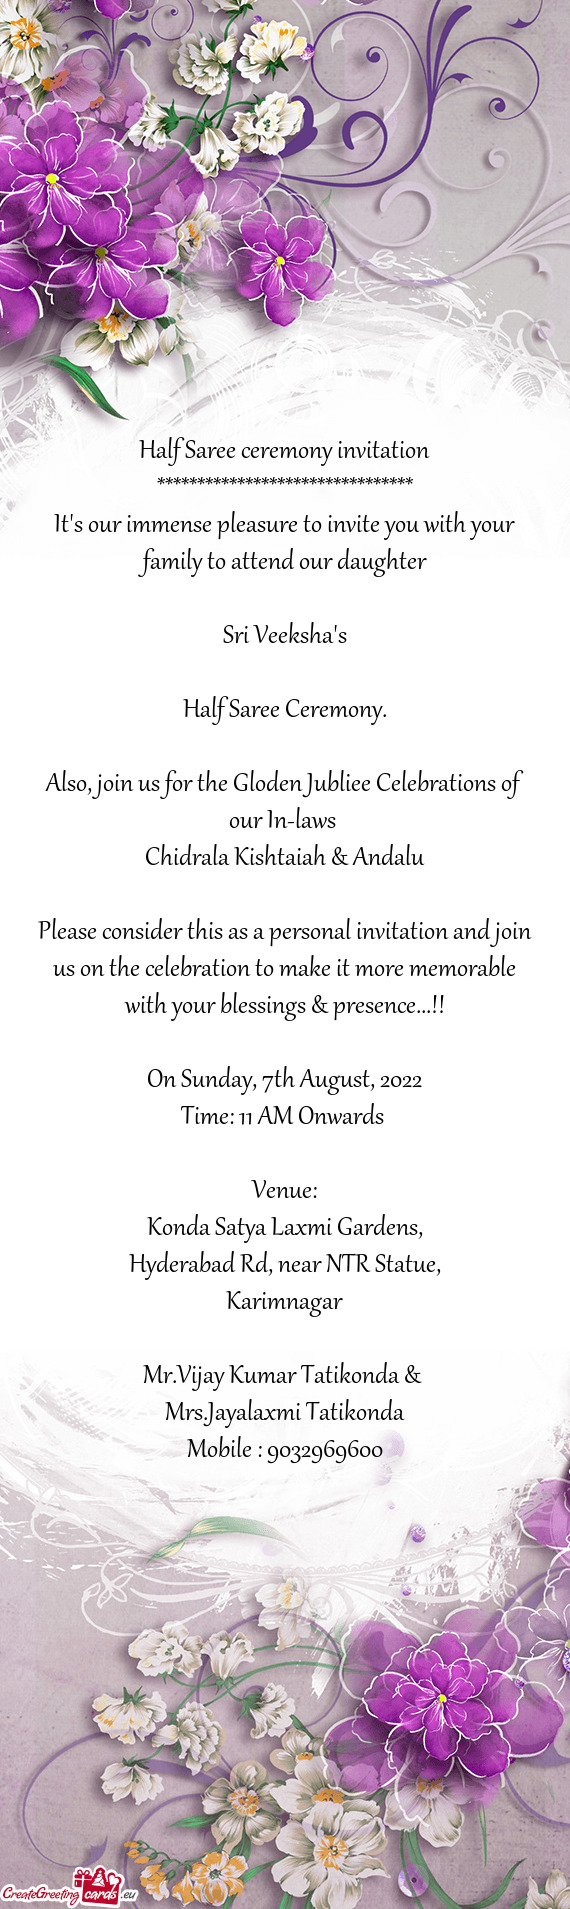 Also, join us for the Gloden Jubliee Celebrations of our In-laws